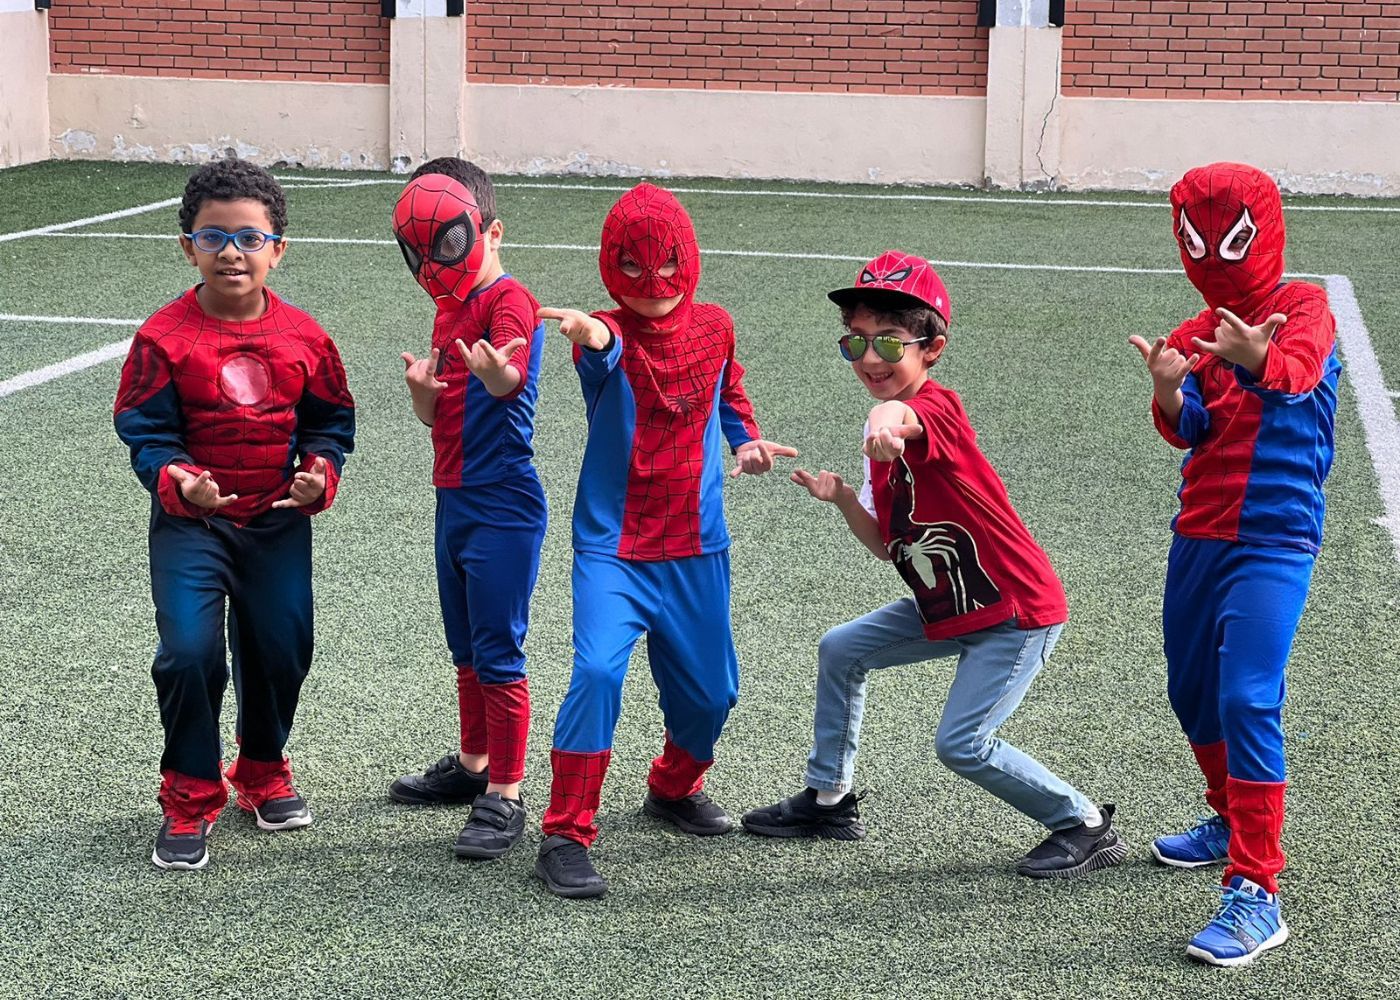 Students of AIS dressed up as different characters for the Book Character Dress Up event